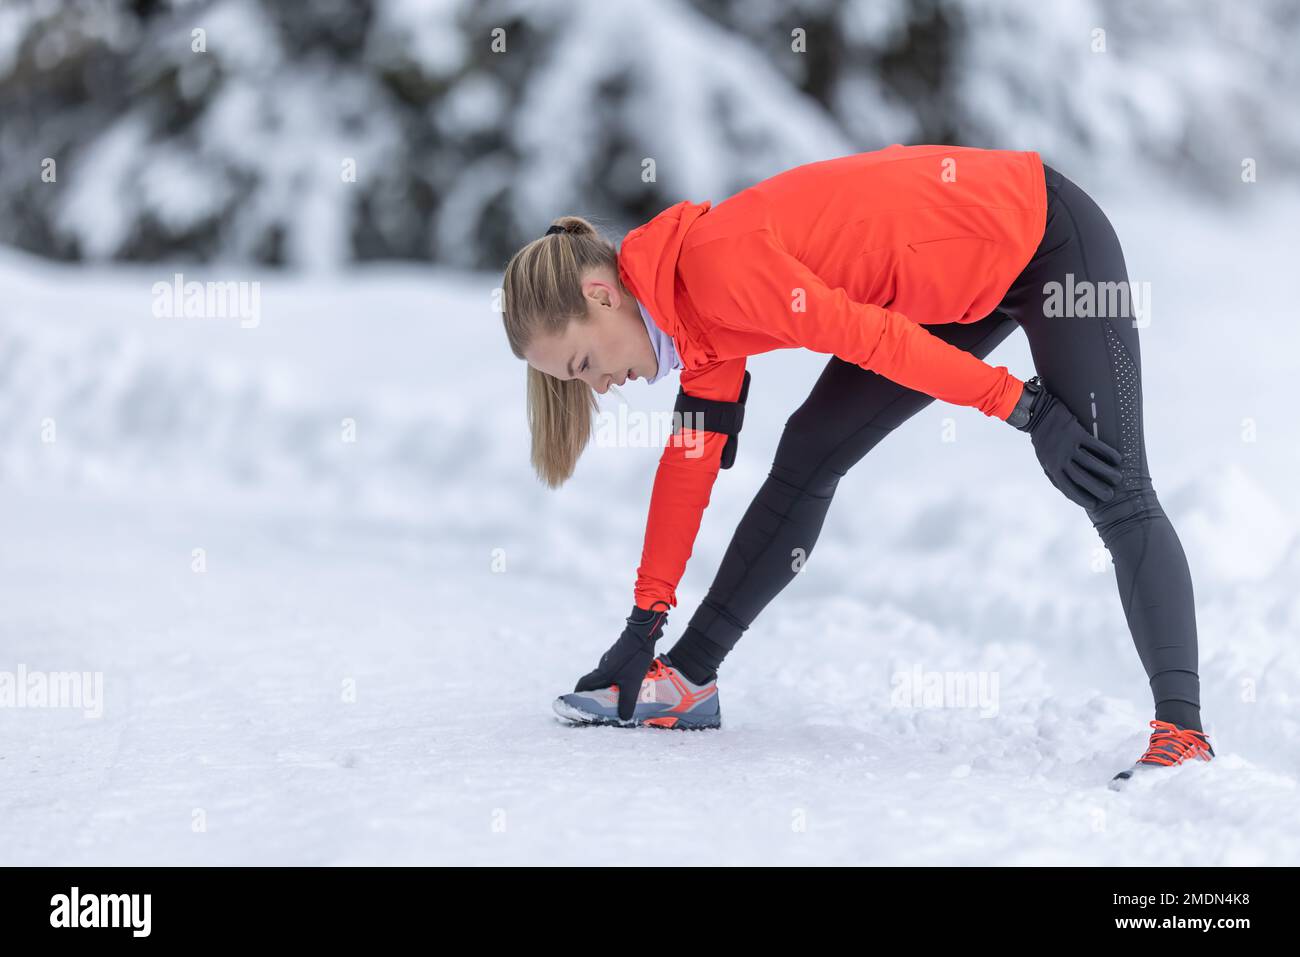 Athletic female runner doing stretching exercise, preparing for workout in the snowy winter park. Stock Photo